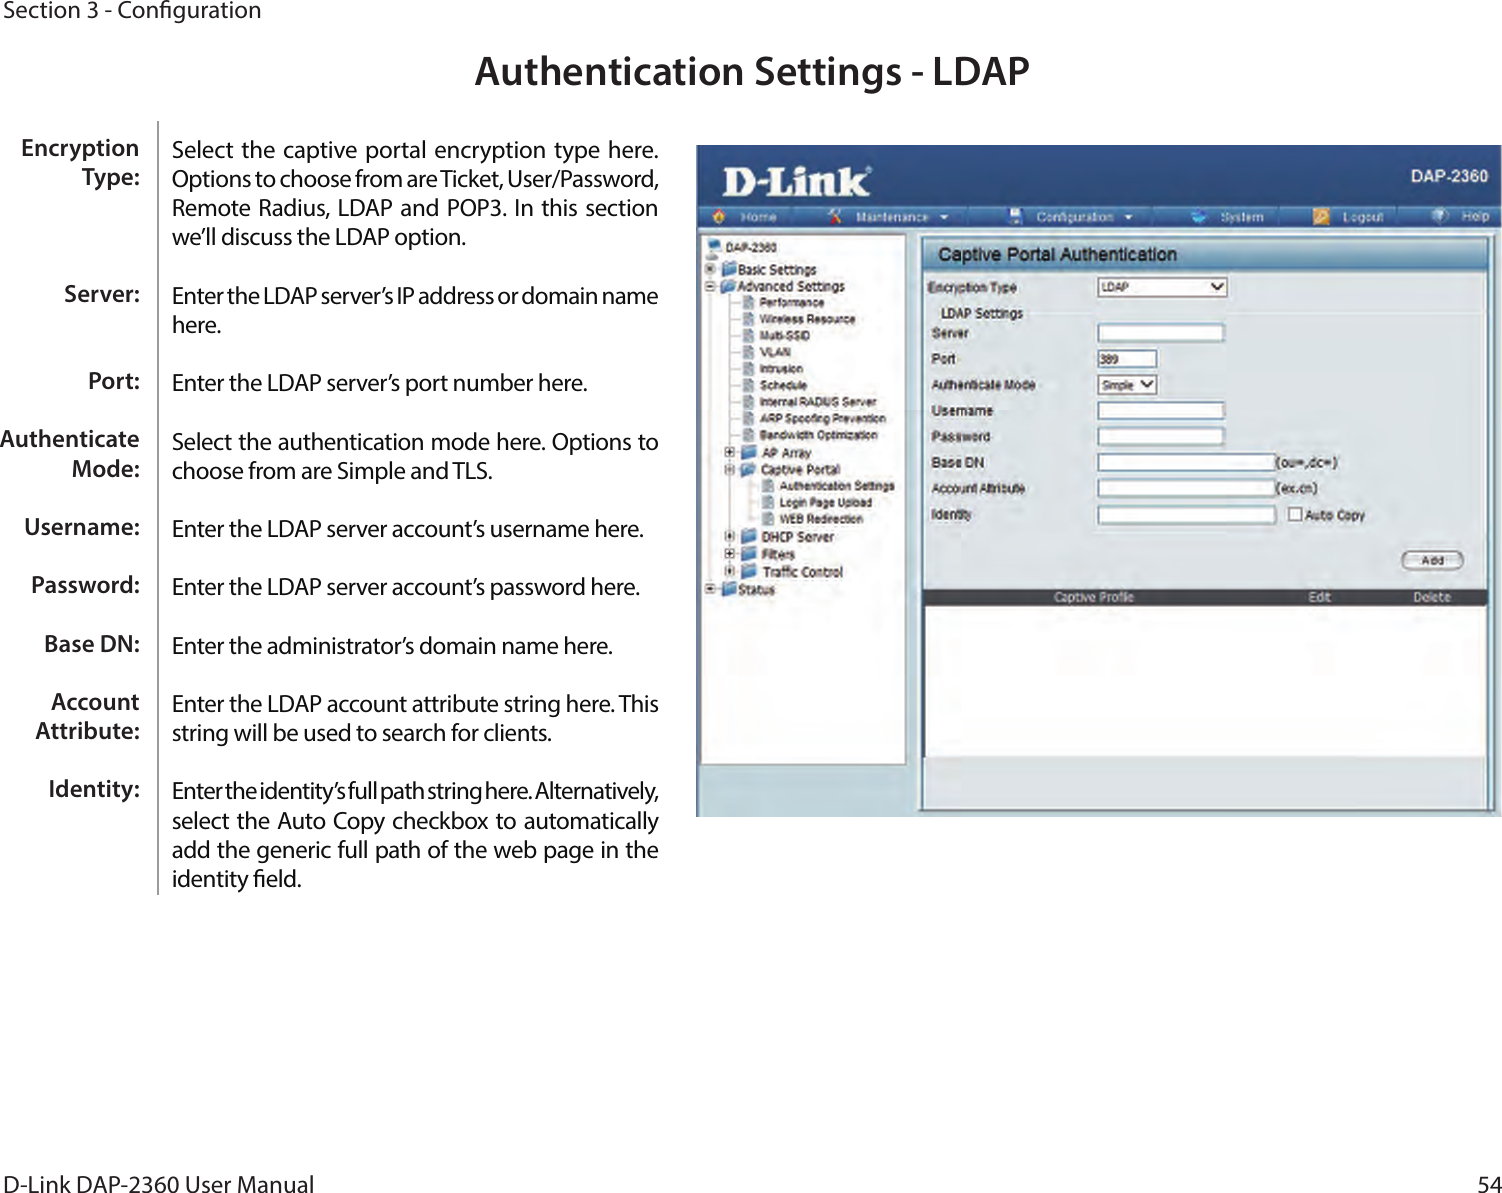 54D-Link DAP-2360 User ManualSection 3 - CongurationAuthentication Settings - LDAPSelect the captive portal encryption type here. Options to choose from are Ticket, User/Password, Remote Radius, LDAP and POP3. In this section we’ll discuss the LDAP option.Enter the LDAP server’s IP address or domain name here.Enter the LDAP server’s port number here.Select the authentication mode here. Options to choose from are Simple and TLS.Enter the LDAP server account’s username here.Enter the LDAP server account’s password here.Enter the administrator’s domain name here.Enter the LDAP account attribute string here. This string will be used to search for clients.Enter the identity’s full path string here. Alternatively, select the Auto Copy checkbox to automatically add the generic full path of the web page in the identity eld.Encryption Type:Server:Port:Authenticate Mode:Username:Password:Base DN:Account Attribute:Identity: